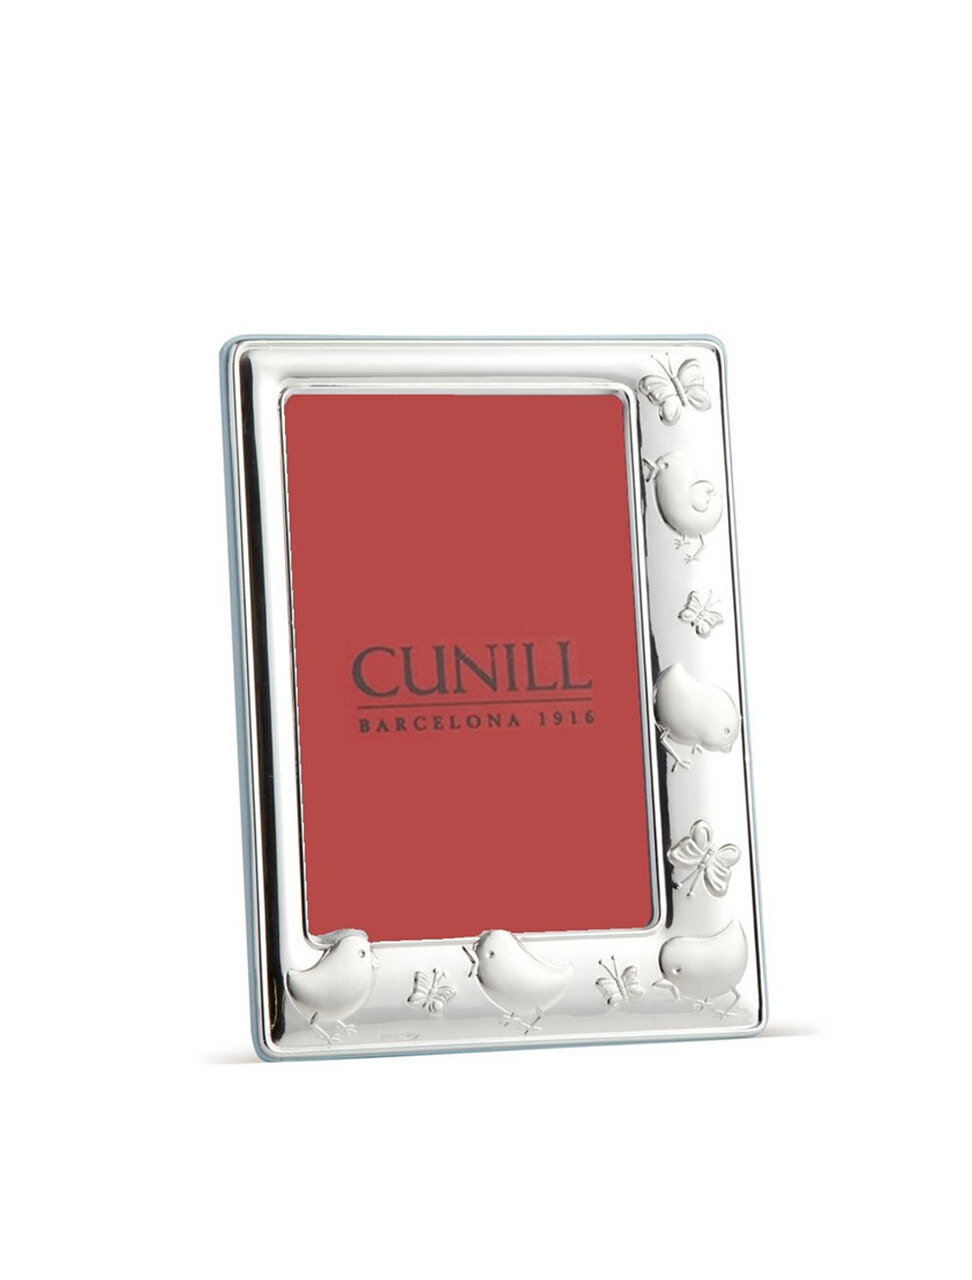 Cunill Chicks & Butterflies 4 x 6 Inch Picture Frame Pink back - Sterling Silver